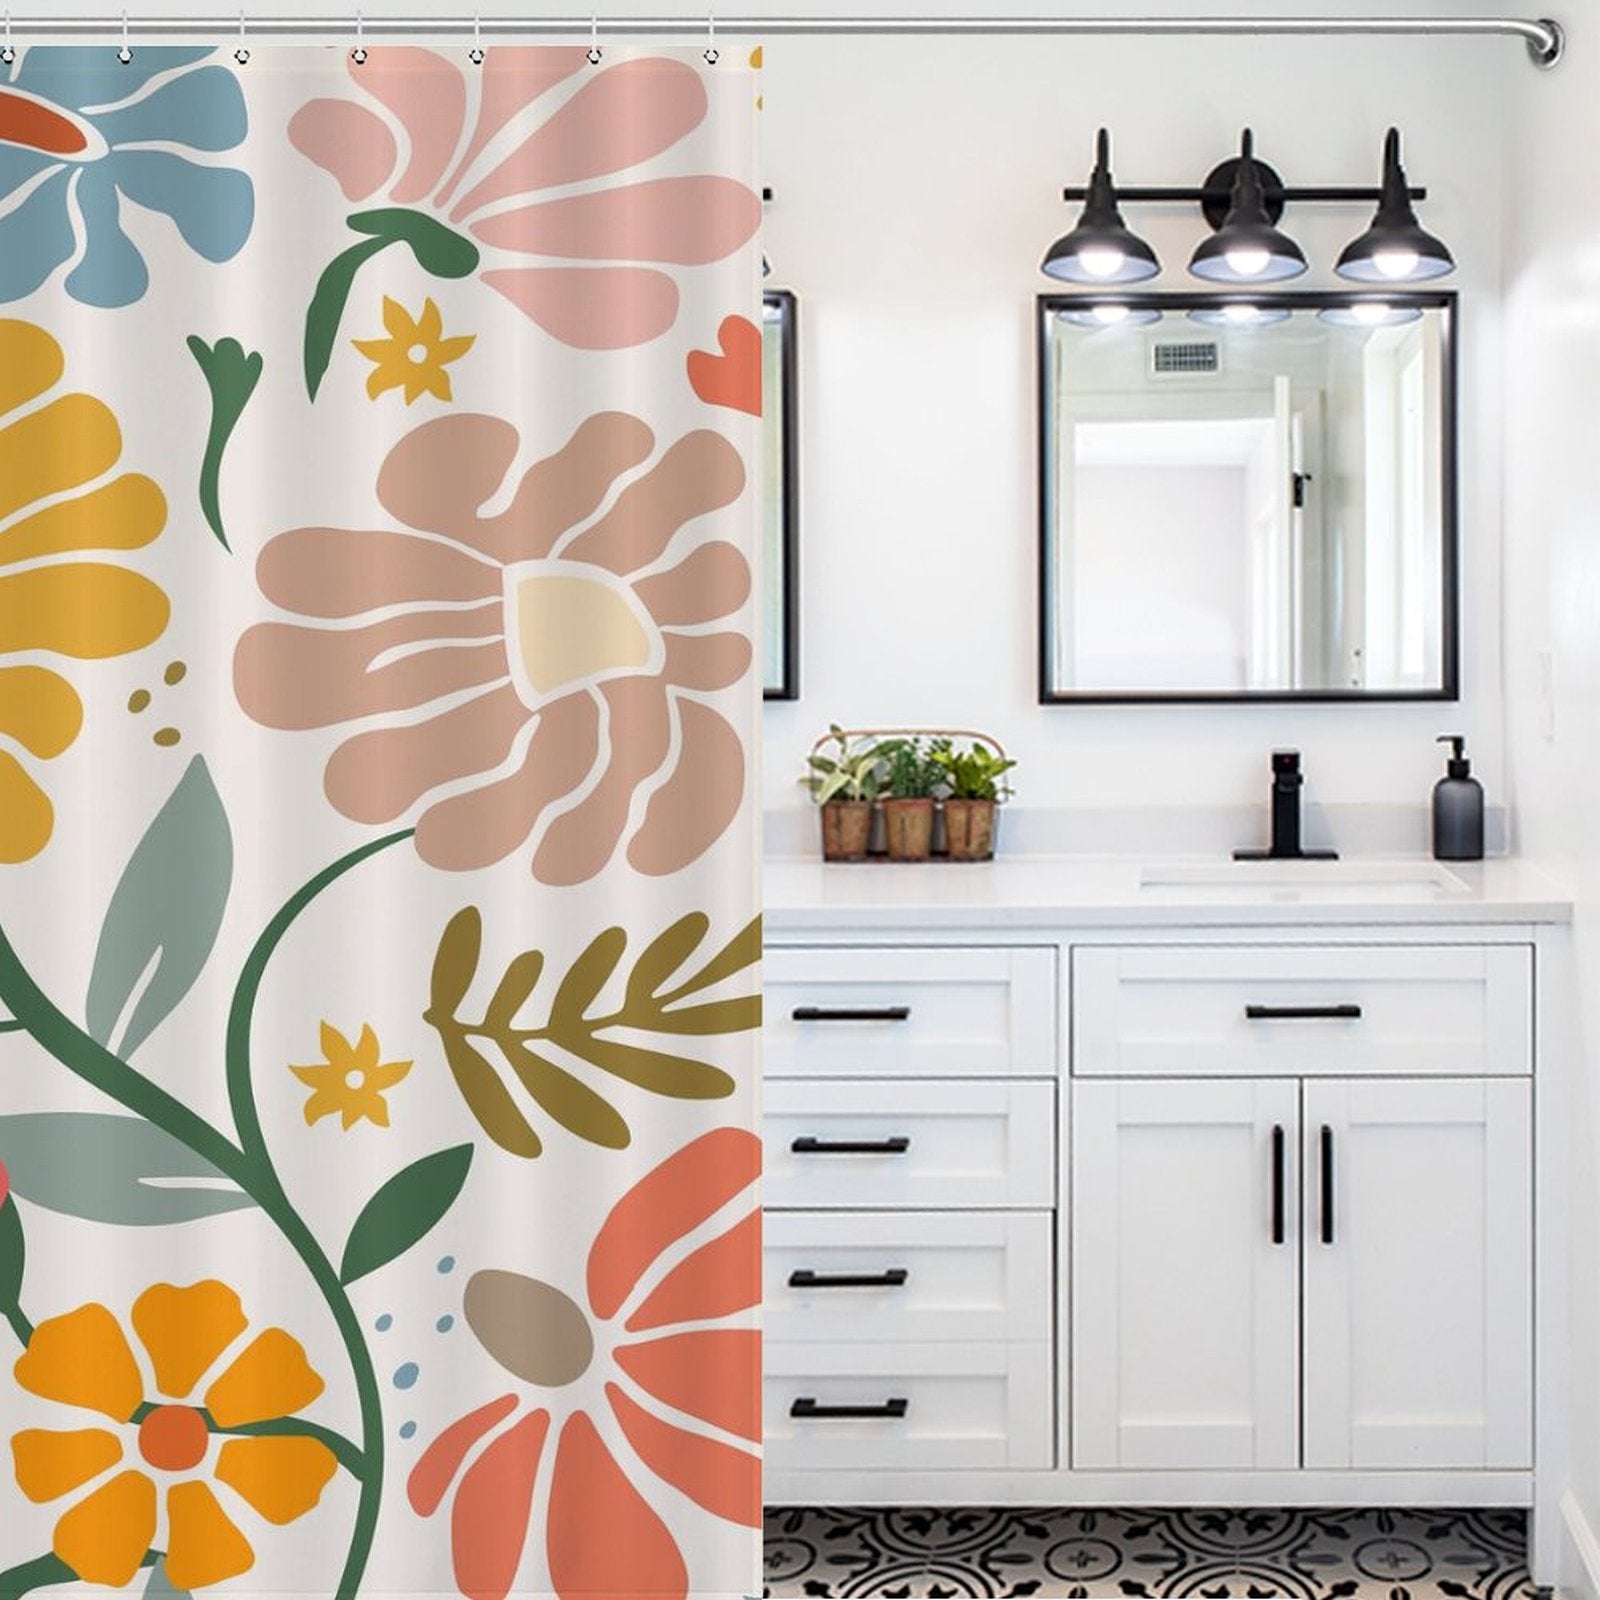 A white bathroom featuring a vanity with a black-framed mirror and three light fixtures. The Cotton Cat Boho Colorful Yellow Flower Leaves Minimalist Watercolor Art Painting Floral Shower Curtain-Cottoncat displays a colorful array of large flowers and leaves, adding a touch of vibrant bathroom decor amidst the minimalist setting.